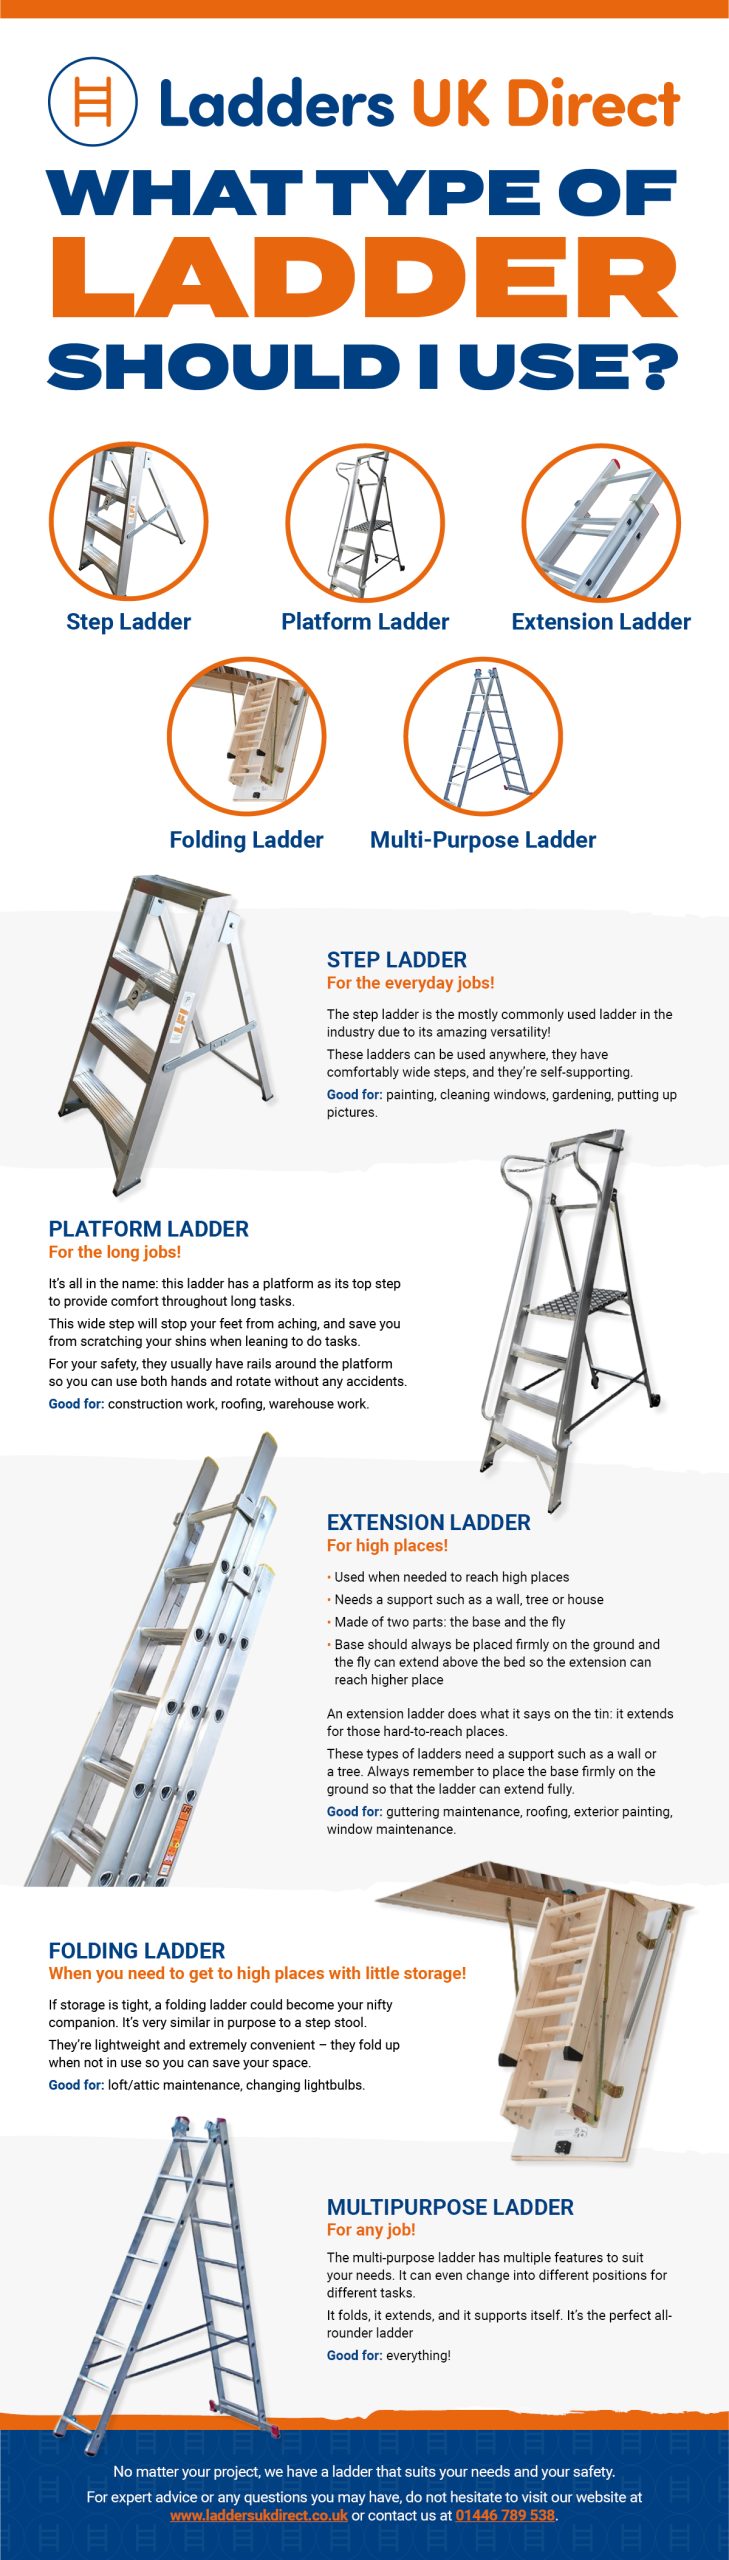 How To Paint High Places Without A Ladder